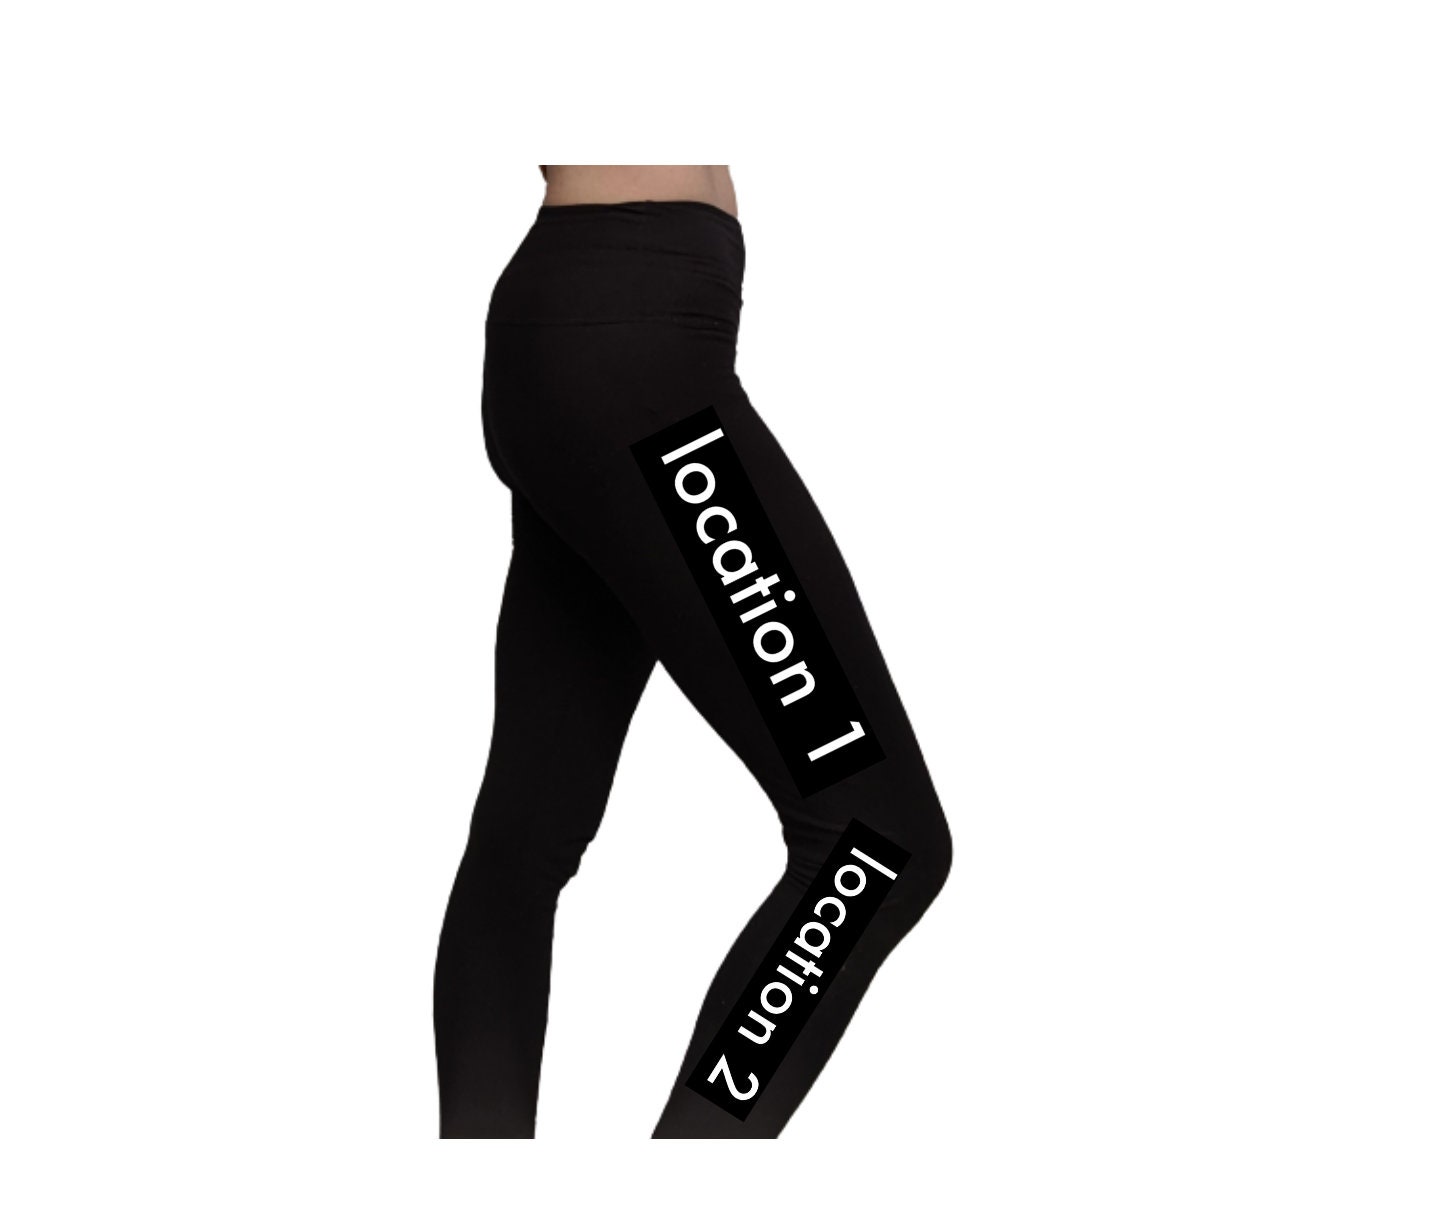 Personalized Name Leggings, Custom Text Leggings, Personalized Leggings  With Name, Personalized Leggings for Group or Team 